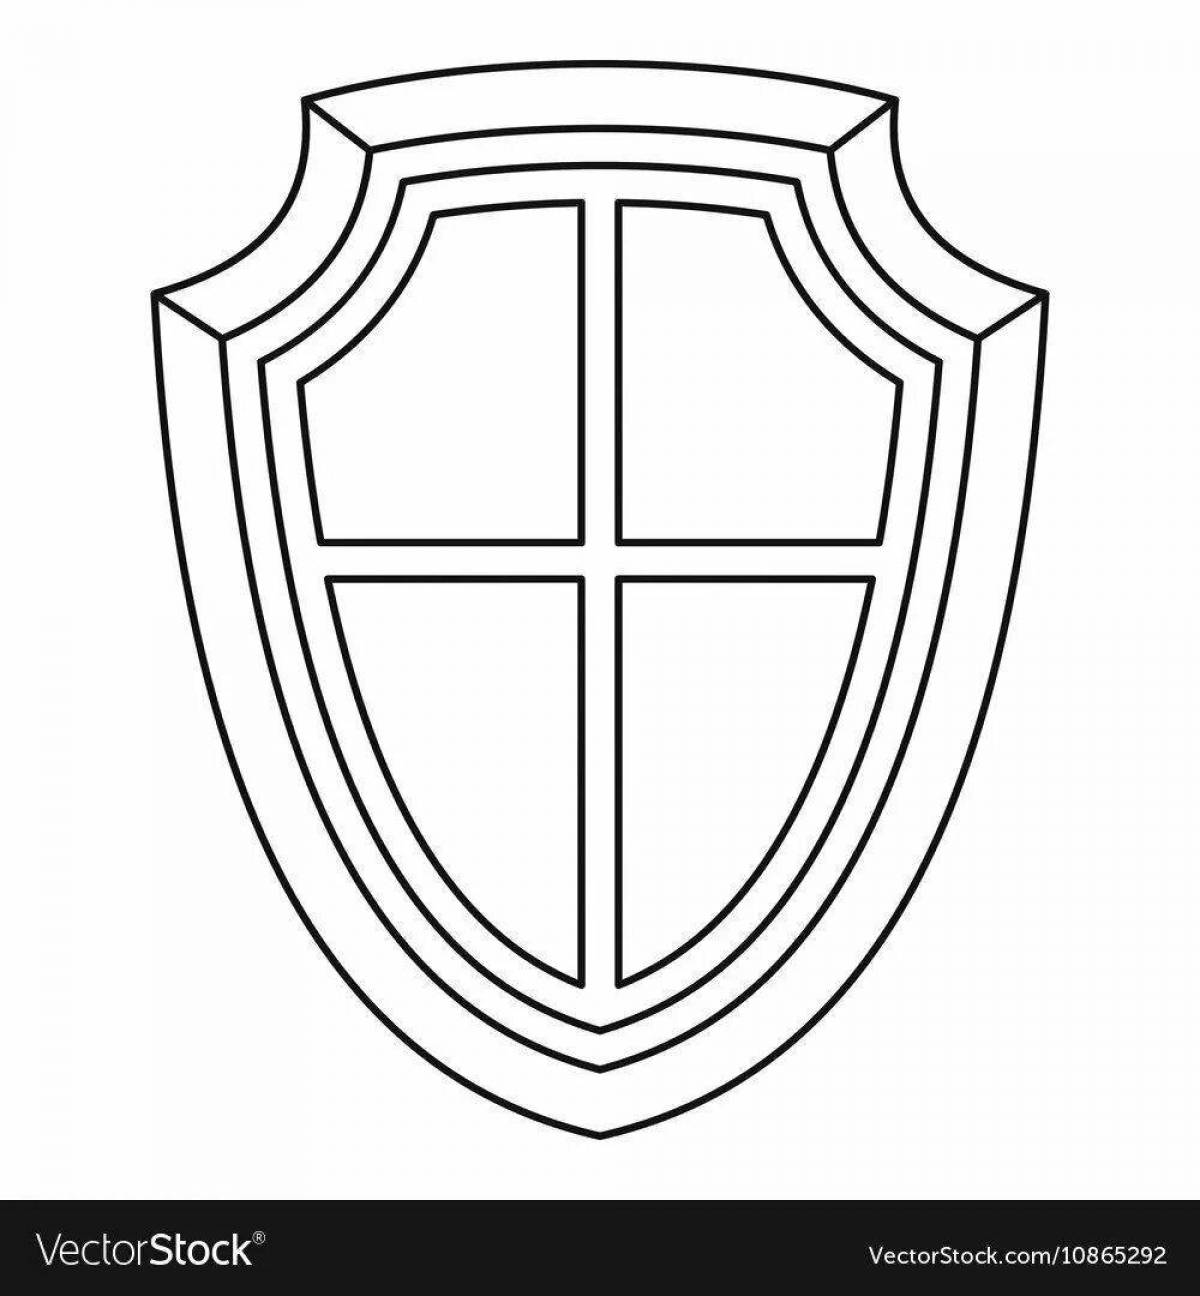 Joyful shield coloring page for kids